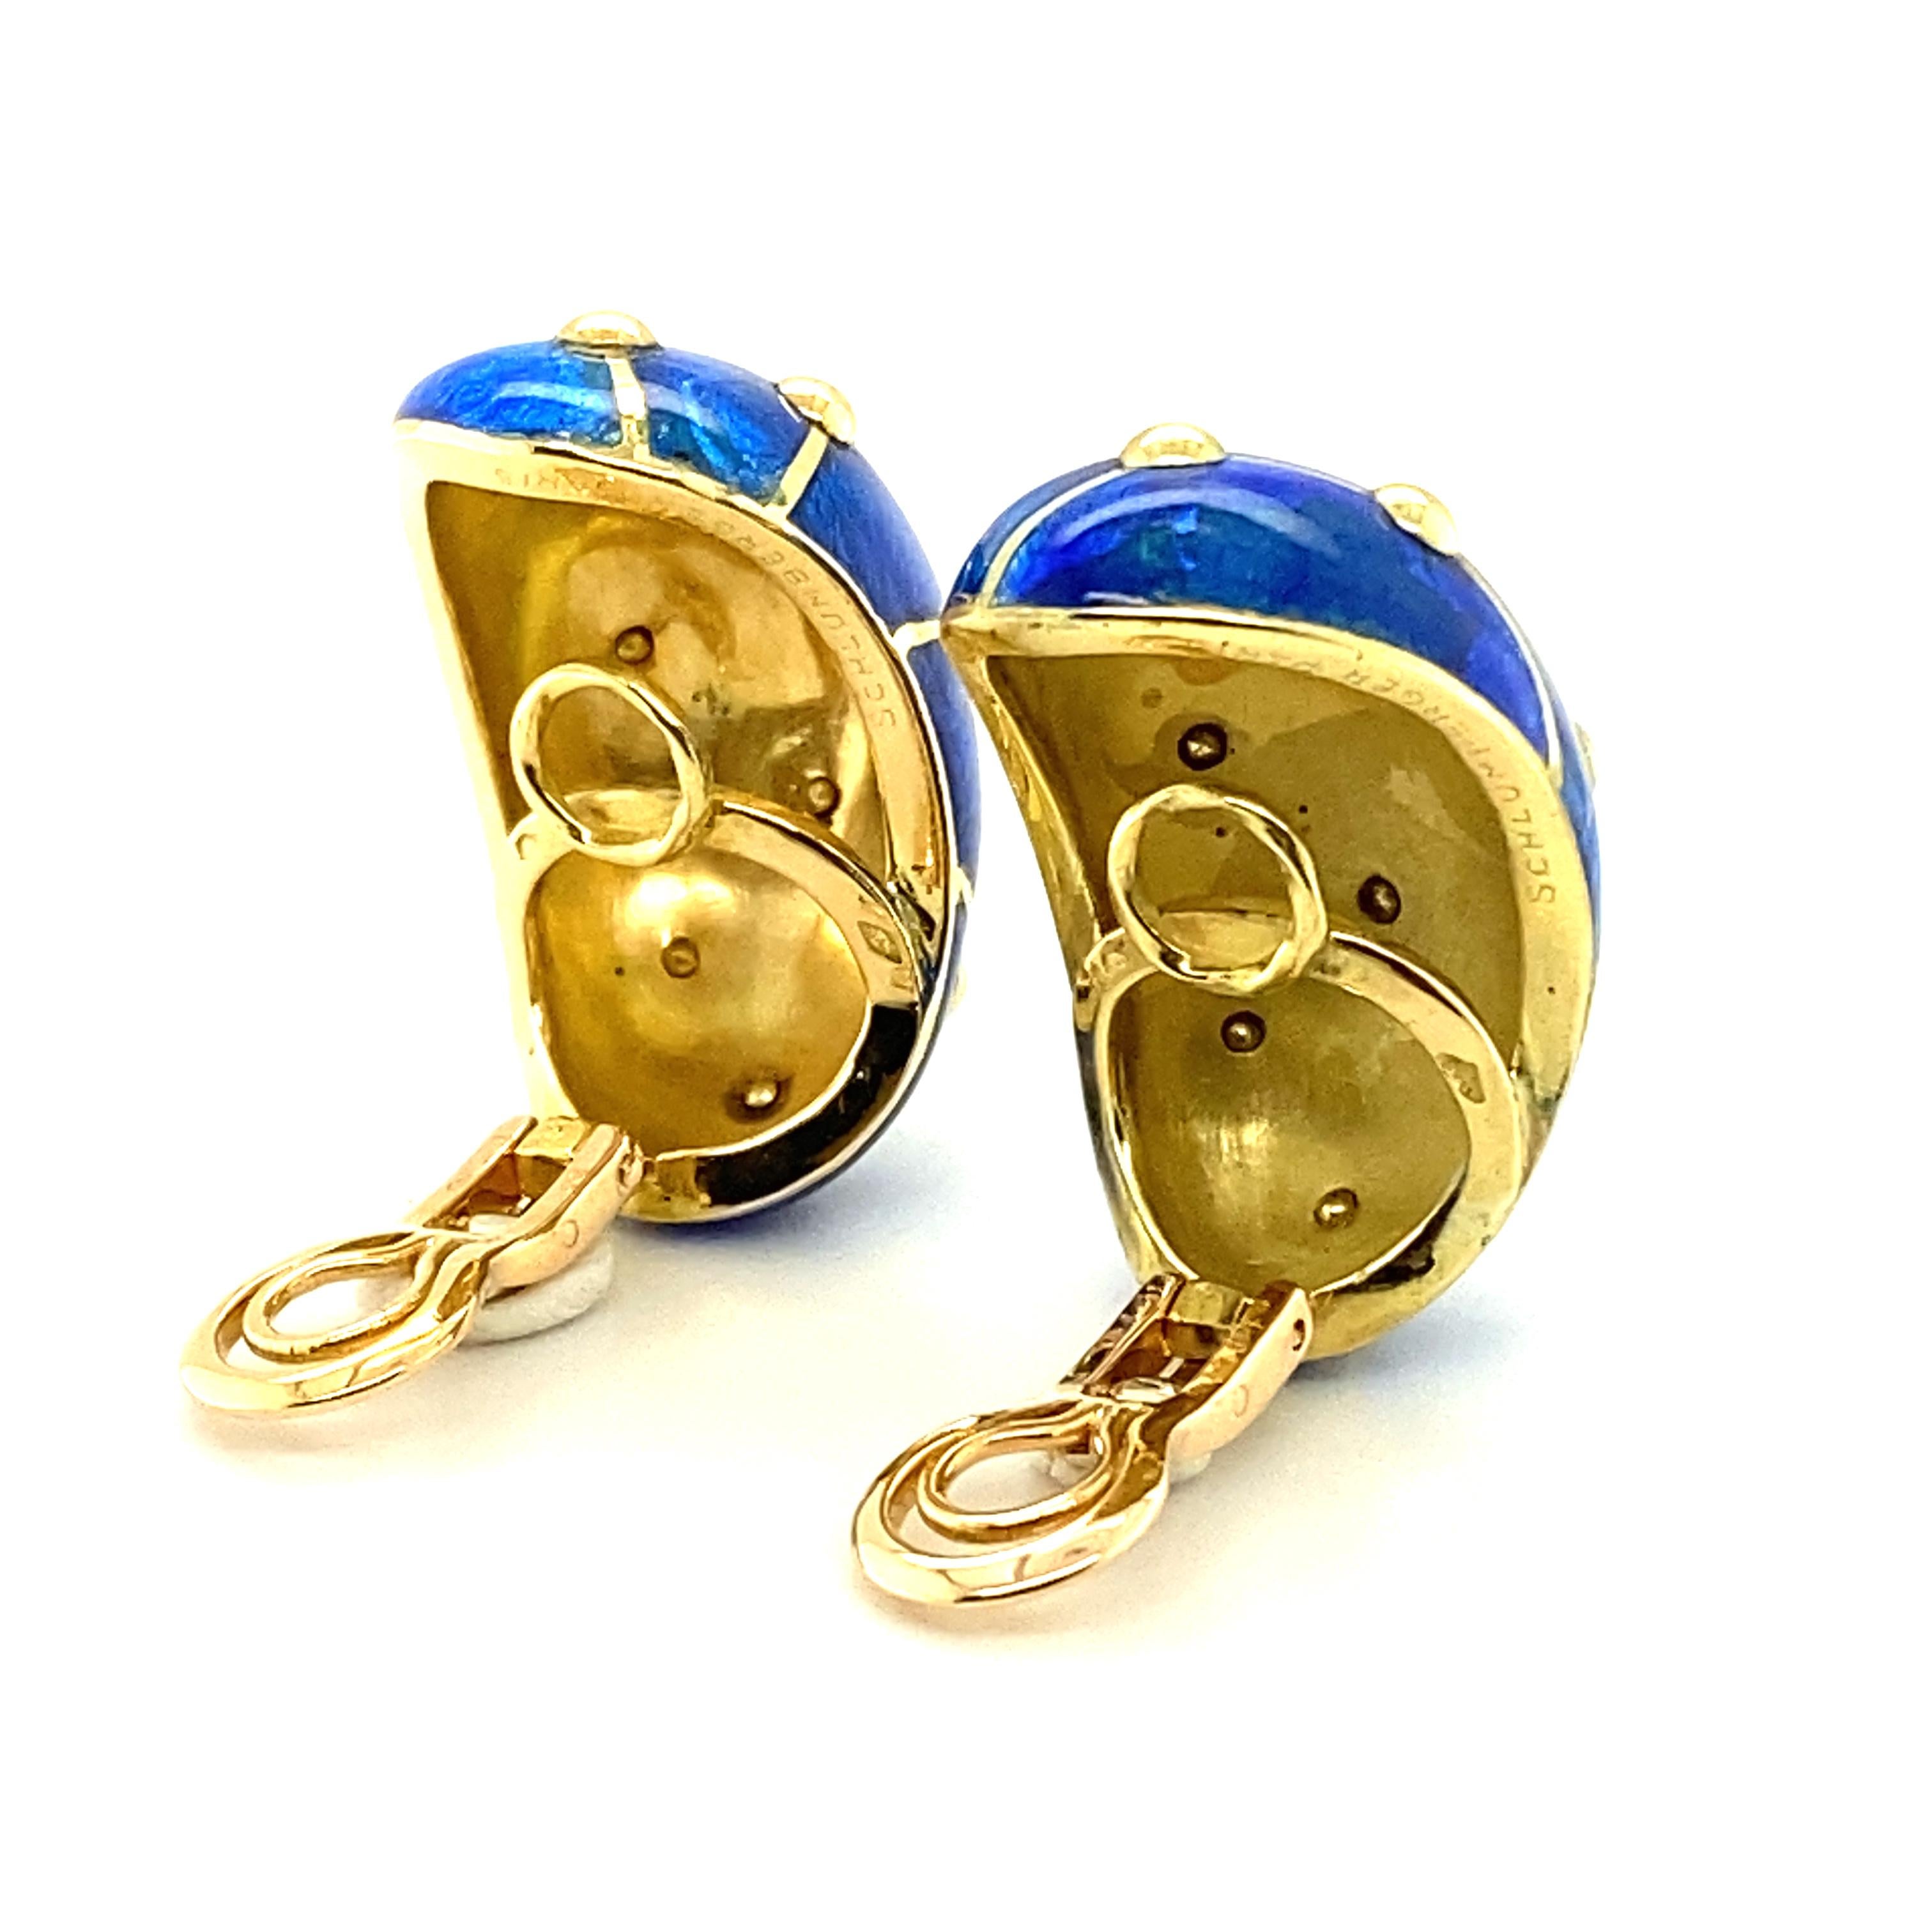 Pair of Gold and Blue Paillonné Enamel 'Banana' Earrings by Jean Schlumberger 7